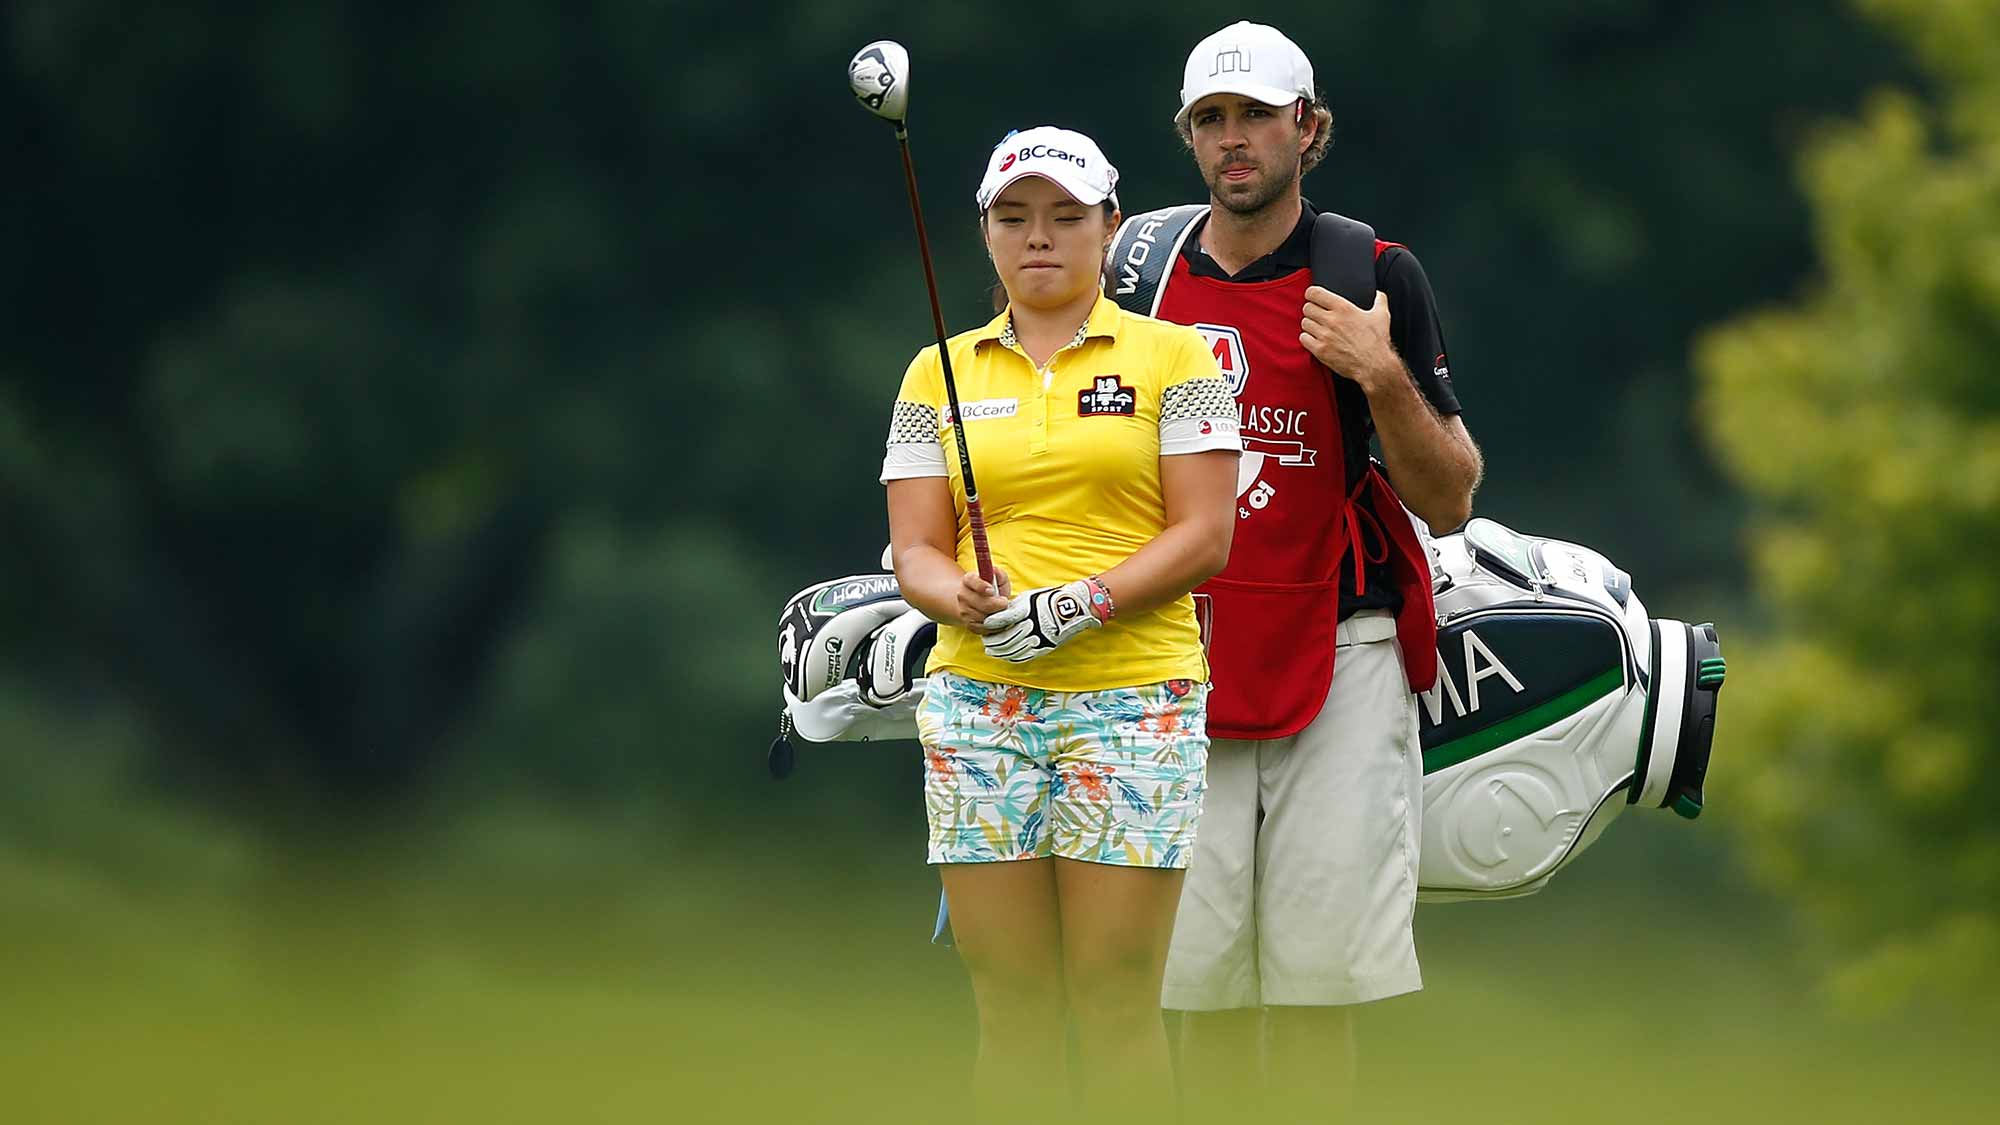 Ha Na Jang of South Korea lines up shot in the 18th fairway with her caddie David Stone during the second round of the Marathon Classic presented by Owens Corning and O-I at Highland Meadows Golf Club